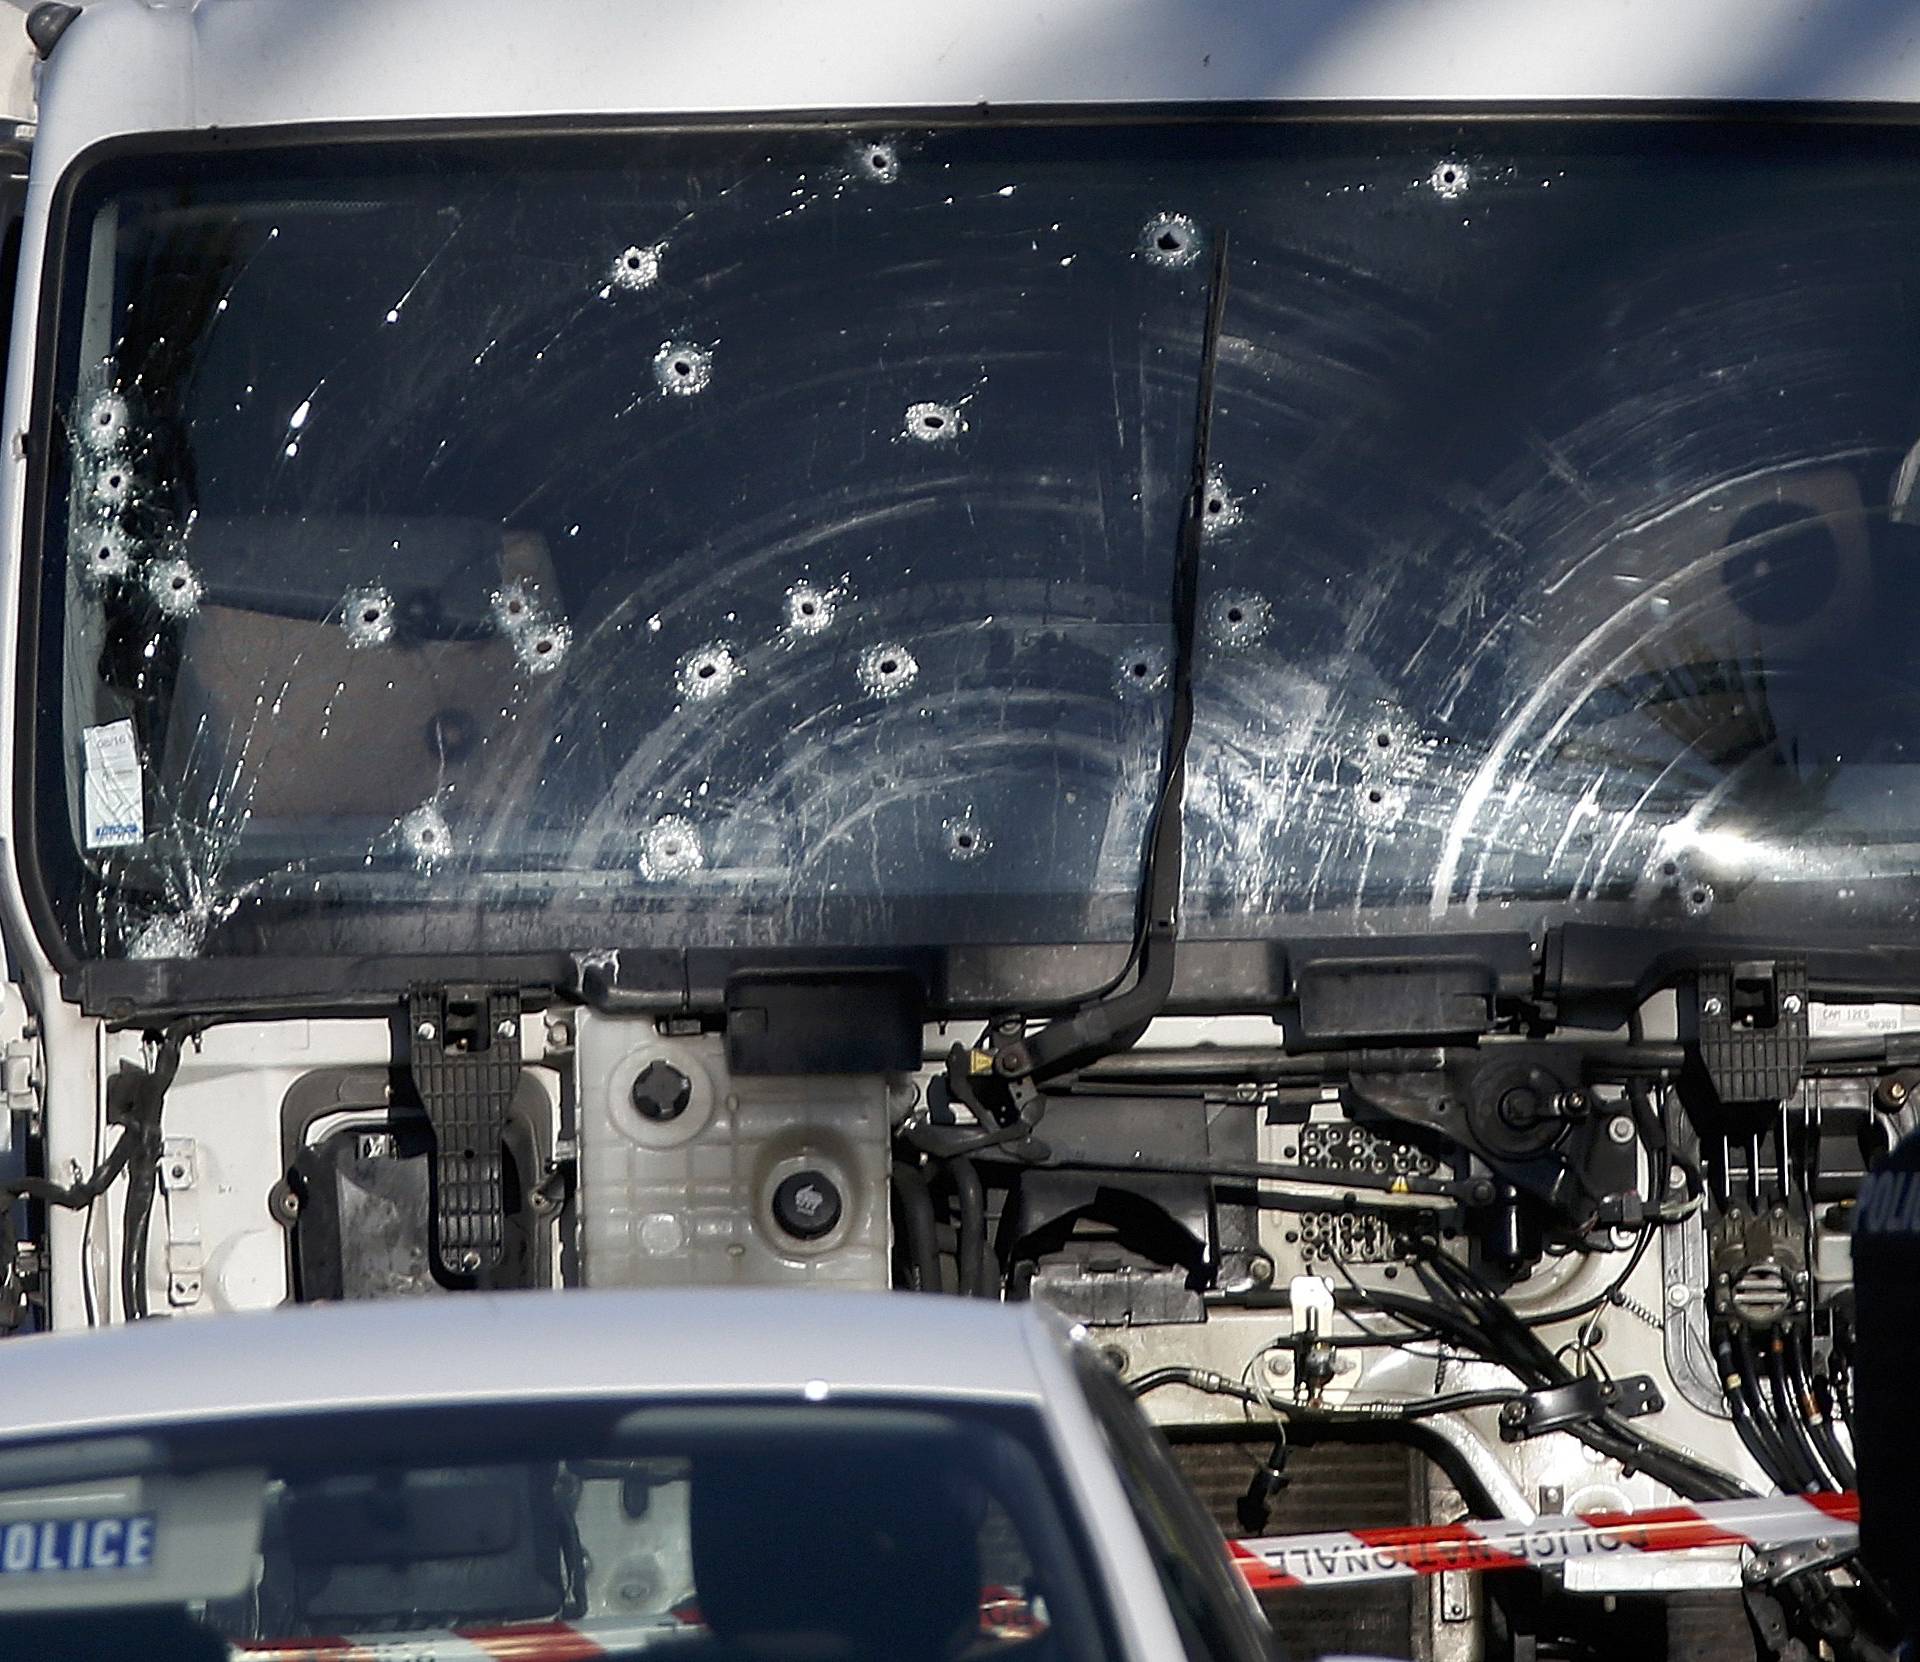 Bullet imacts are seen on the heavy truck the day after it ran into a crowd at high speed killing scores celebrating the Bastille Day July 14 national holiday on the Promenade des Anglais in Nice